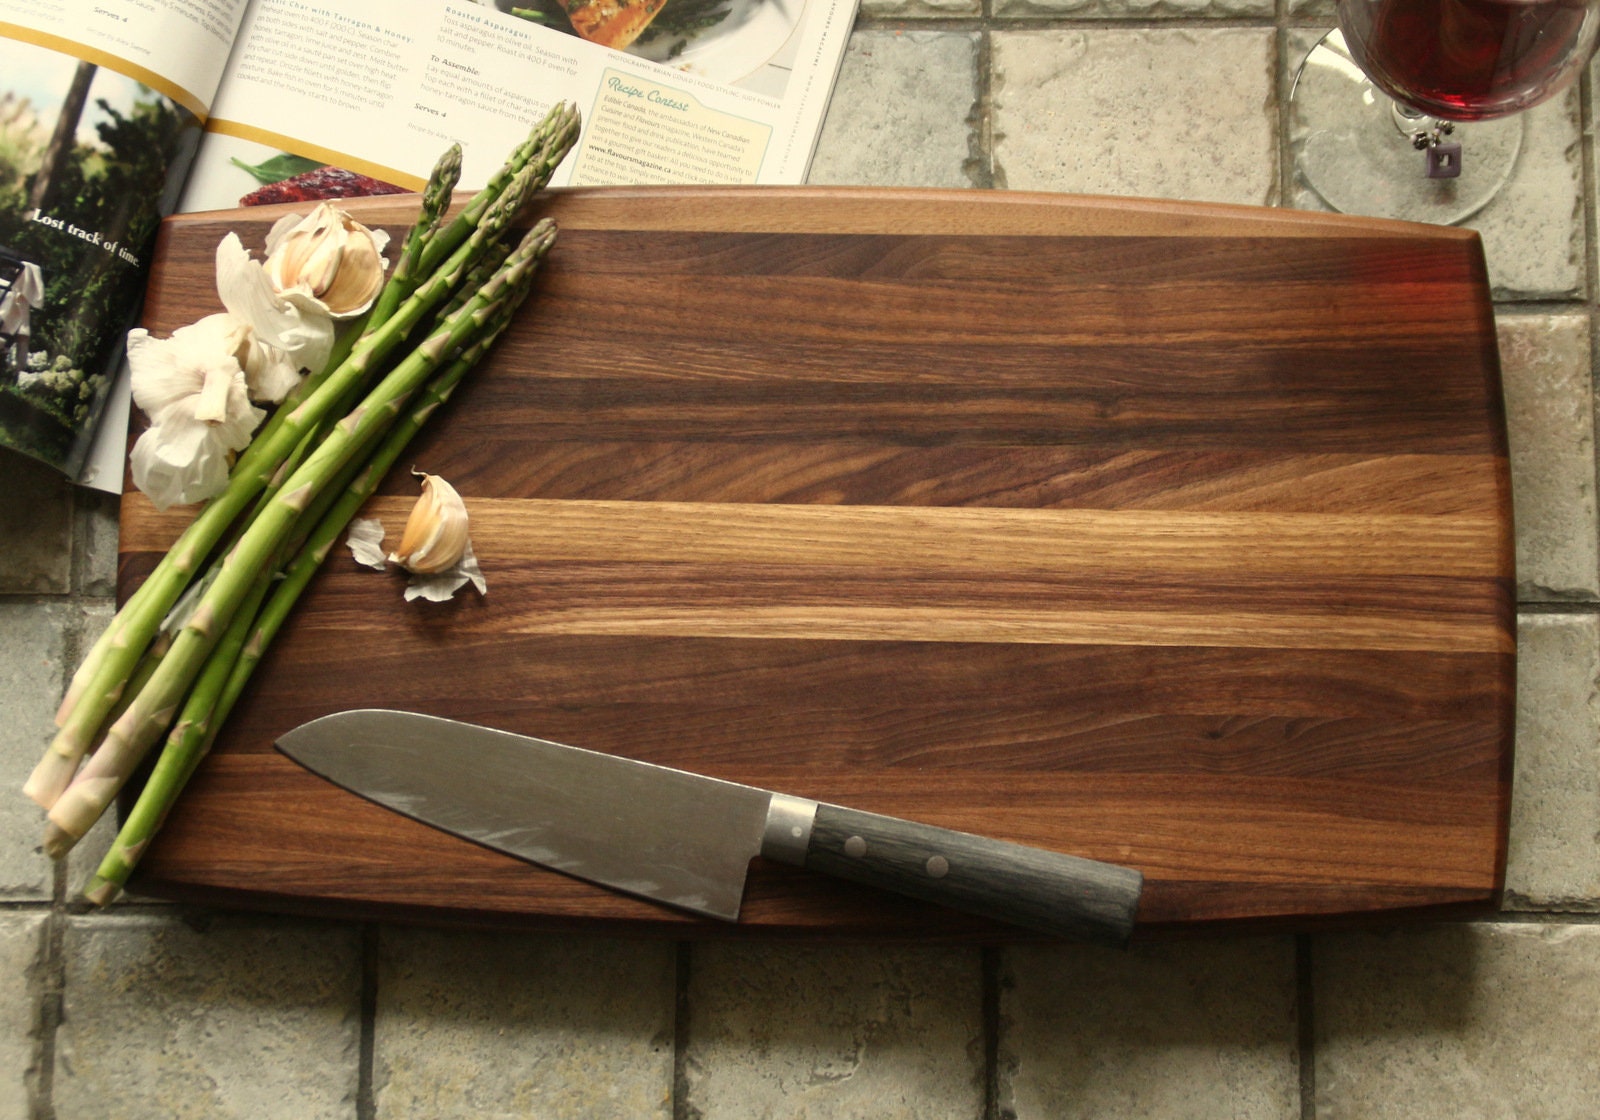 Walnut cutting board or serving tray with curved edges.